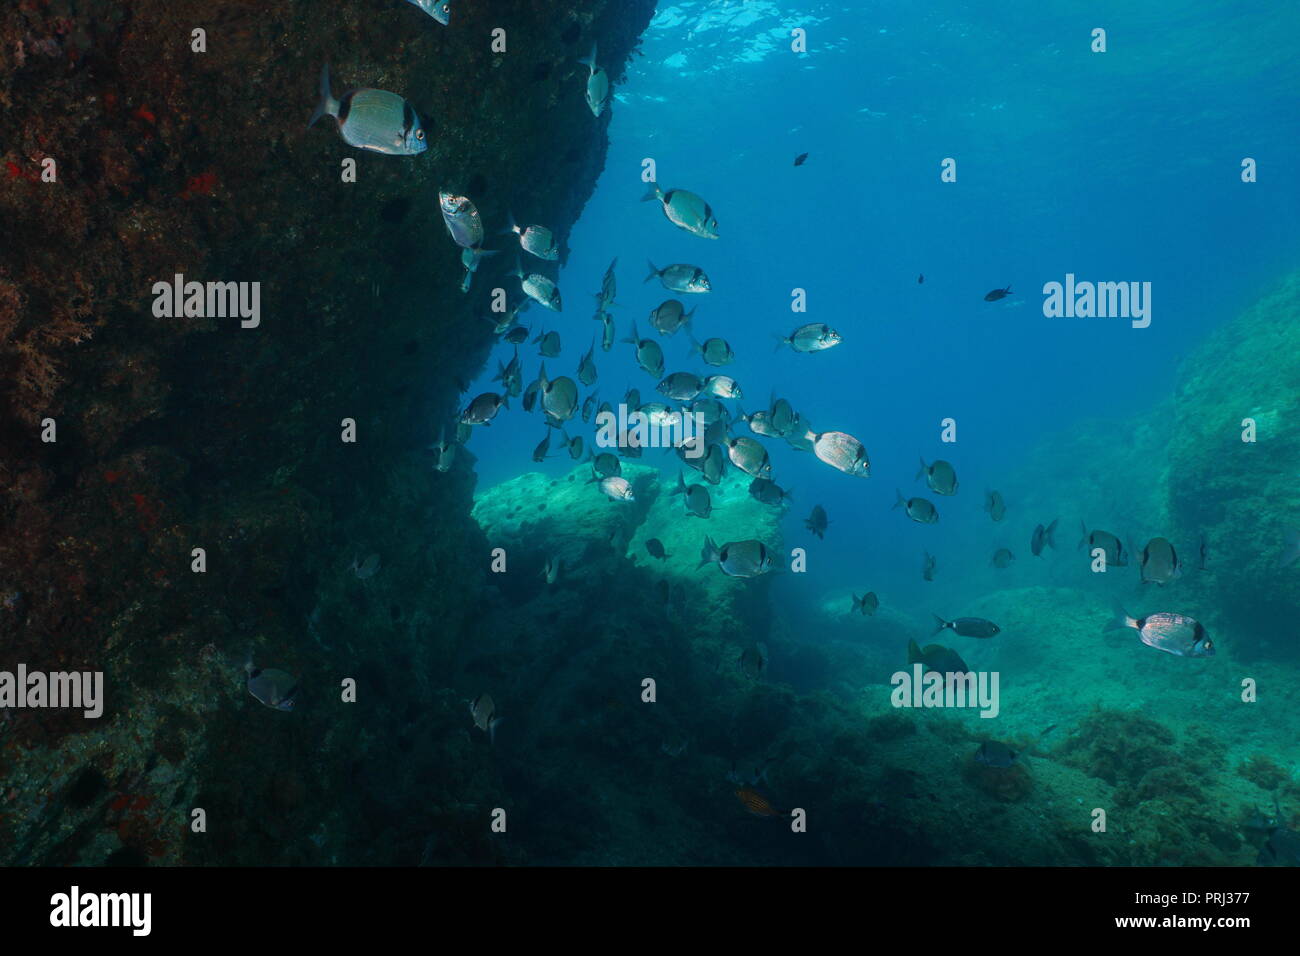 A shoal of common two-banded sea bream fish Diplodus vulgaris, underwater in the Mediterranean sea Stock Photo